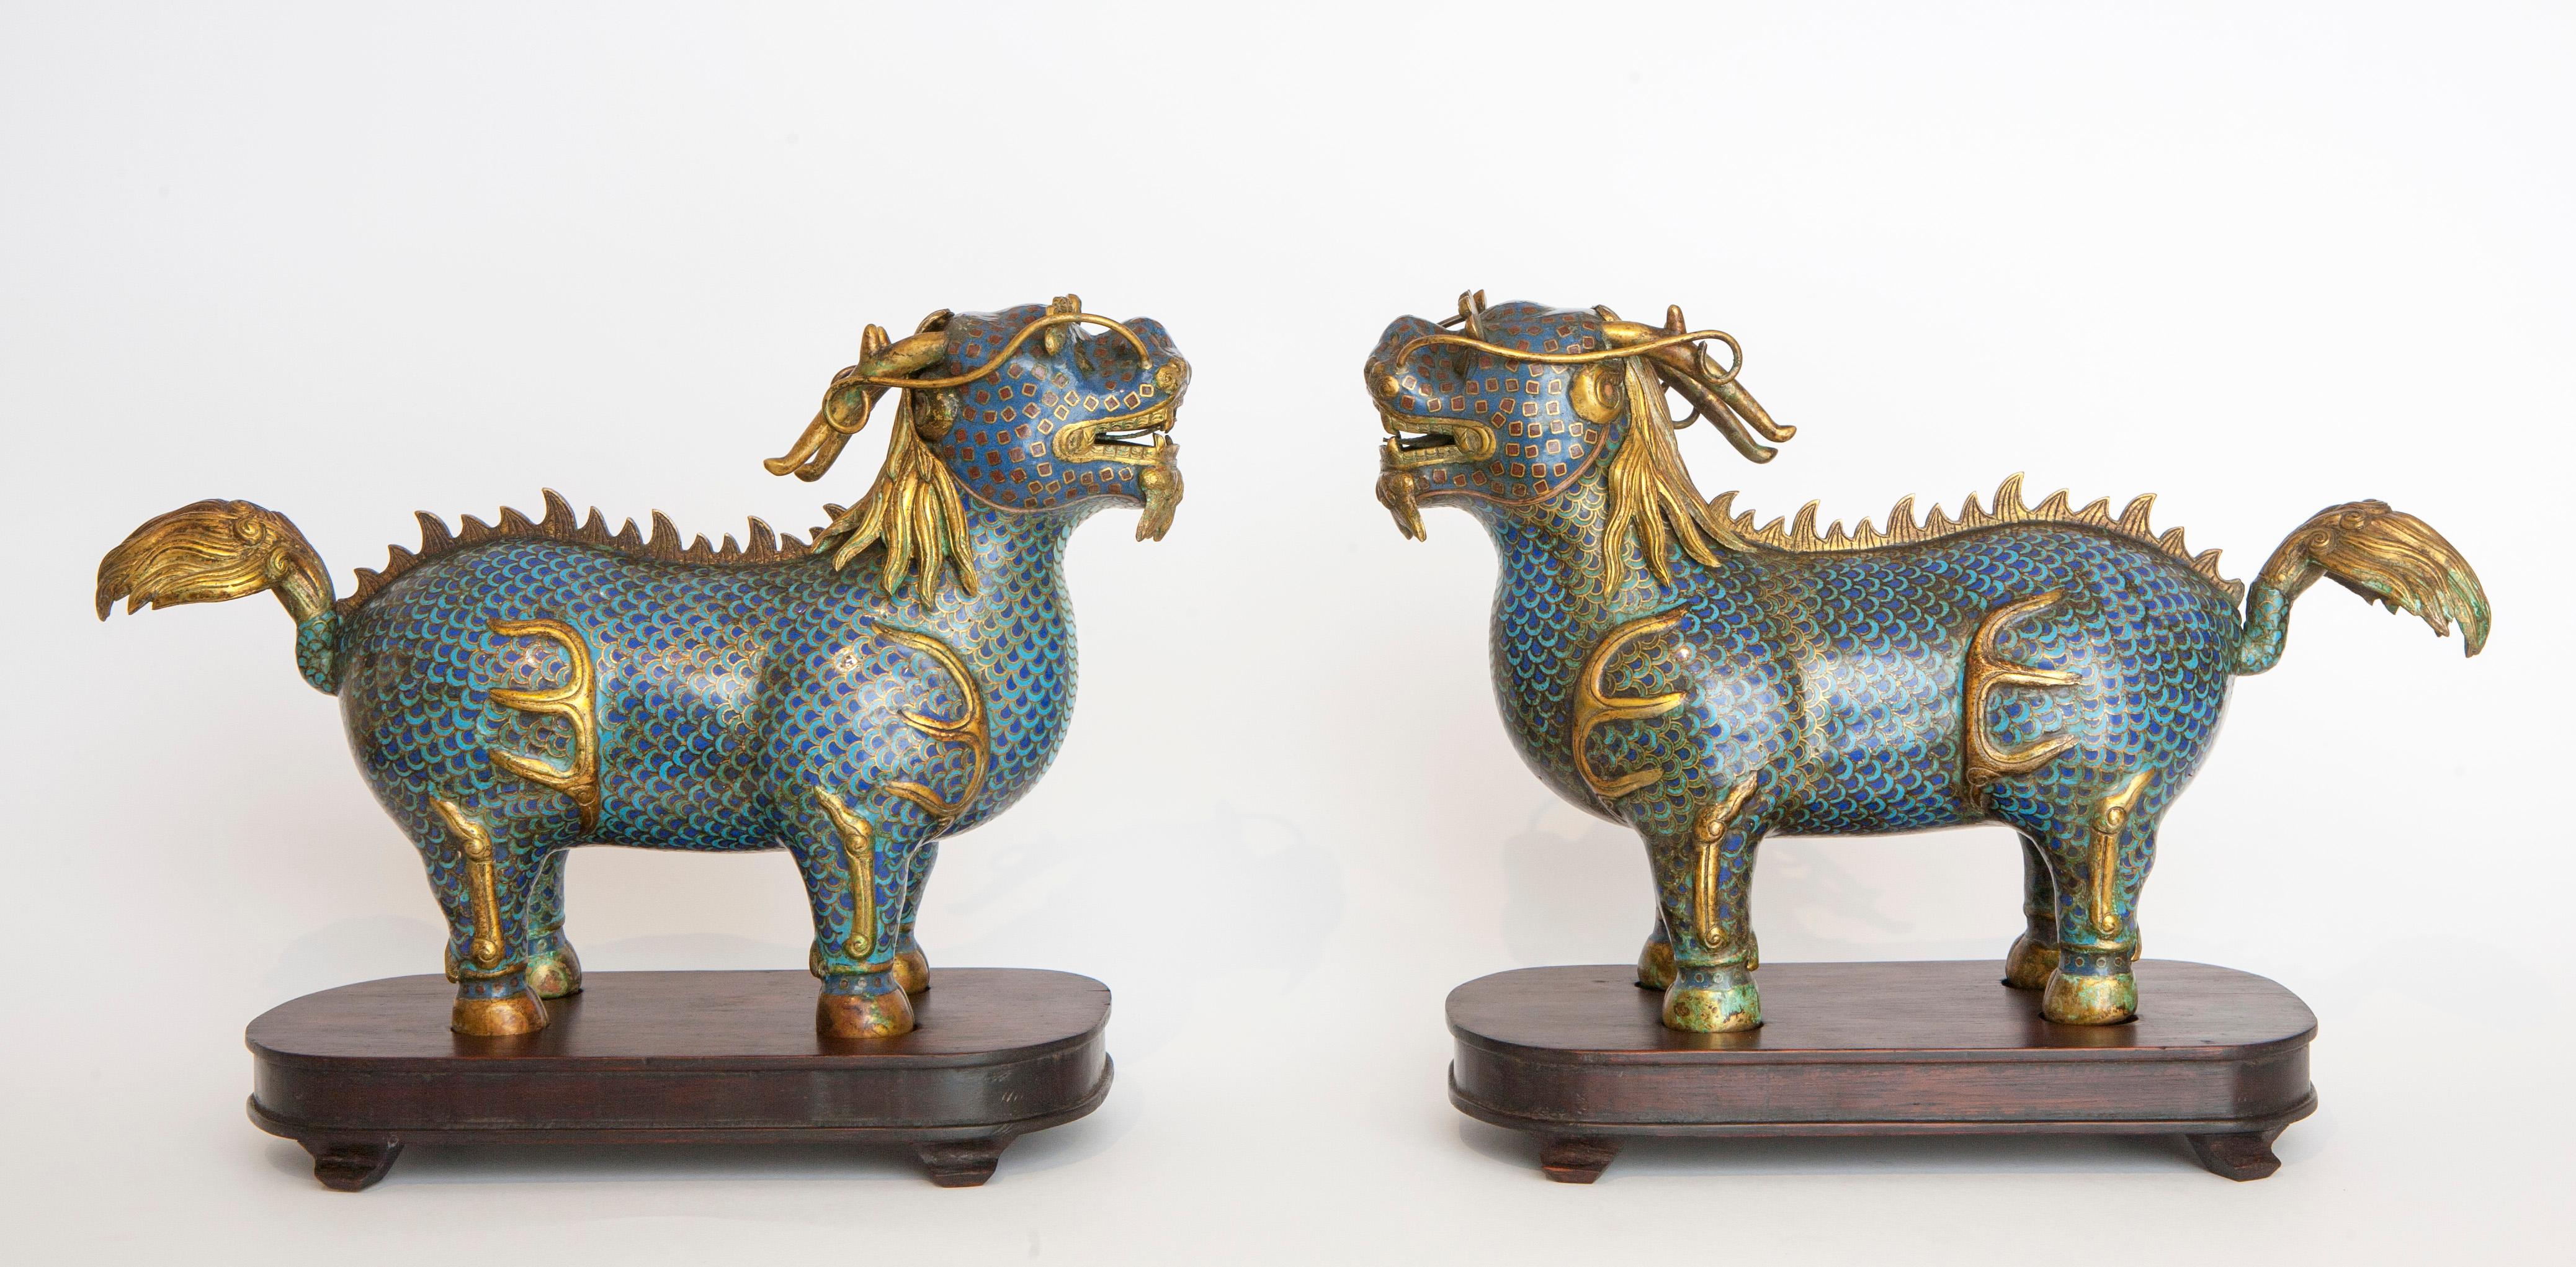 Qilin couple
Made of cloisonné and resting on wooden bases

Qing Dynasty,  Jiaqing Emperor Period (1760-1820)
Dimensions cm: 20 height x 31 length x 9 depth (dimensions with base 31x24x13 cm)

A fantastic animal or Chinese unicorn, it is initially